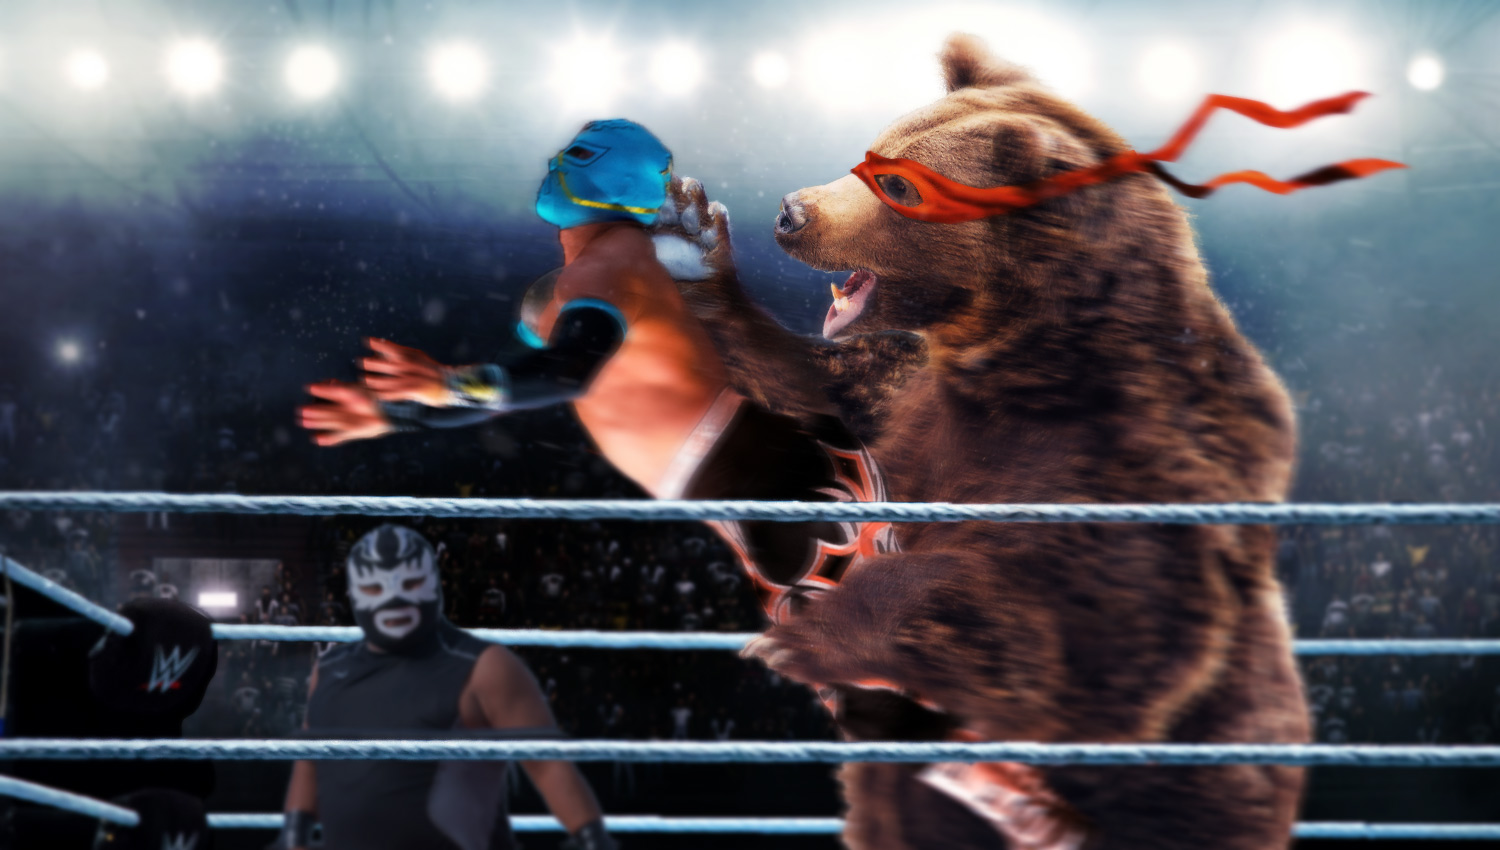 Grizzly Bear Shatters All Pro Wrestling Records After Identifying As Human